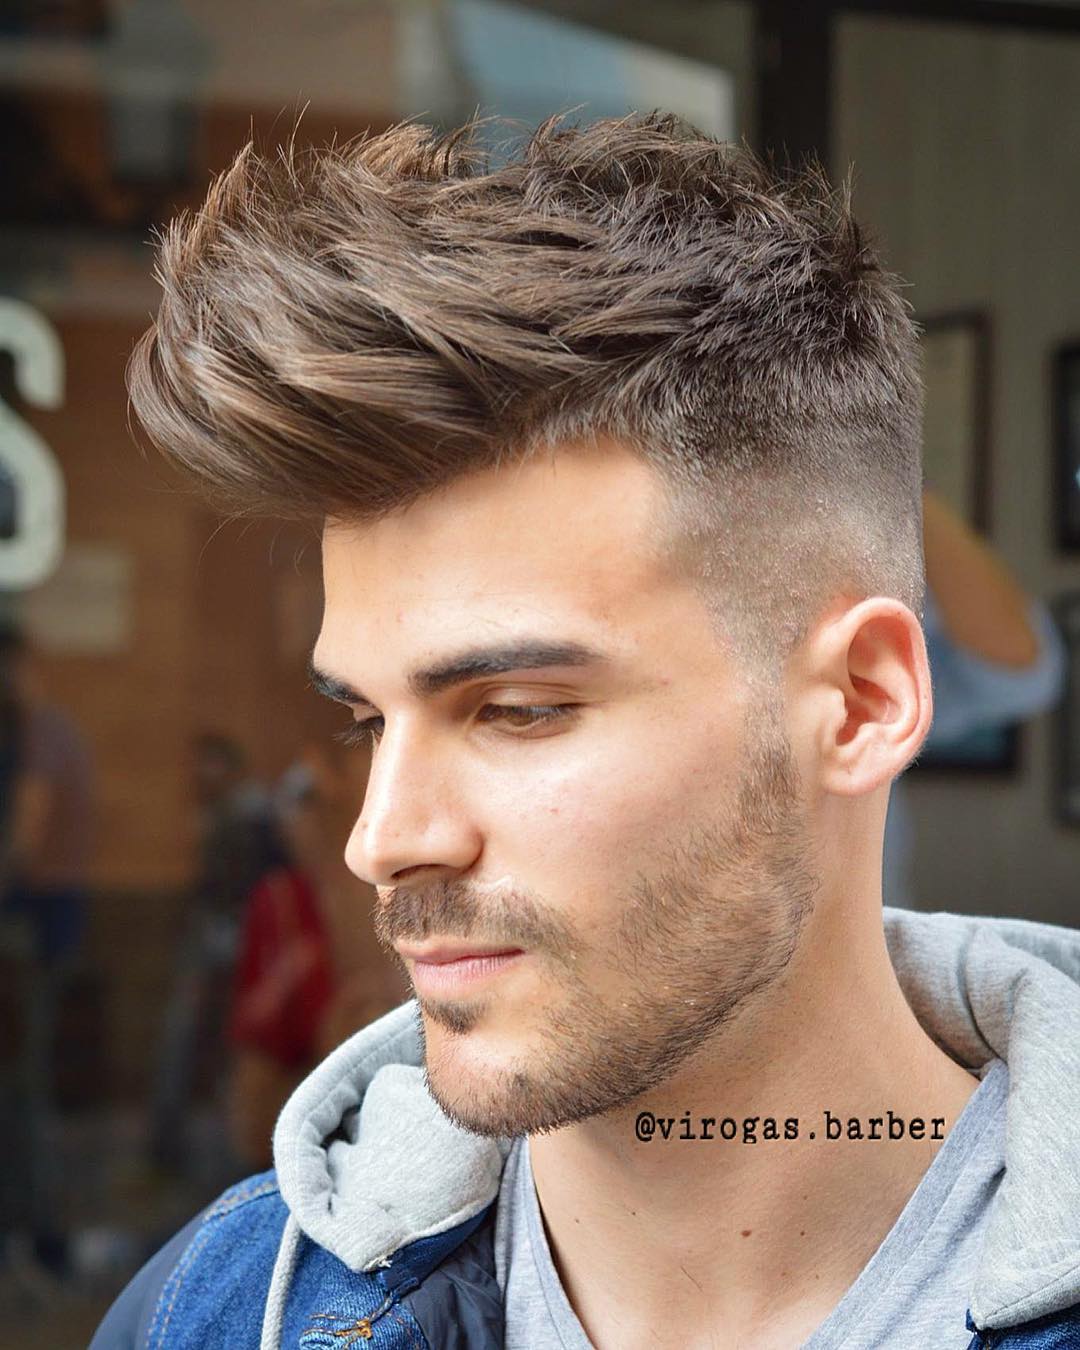 virogas.barber-Popular-Mens-Hairstyles-Texture-Long-Front